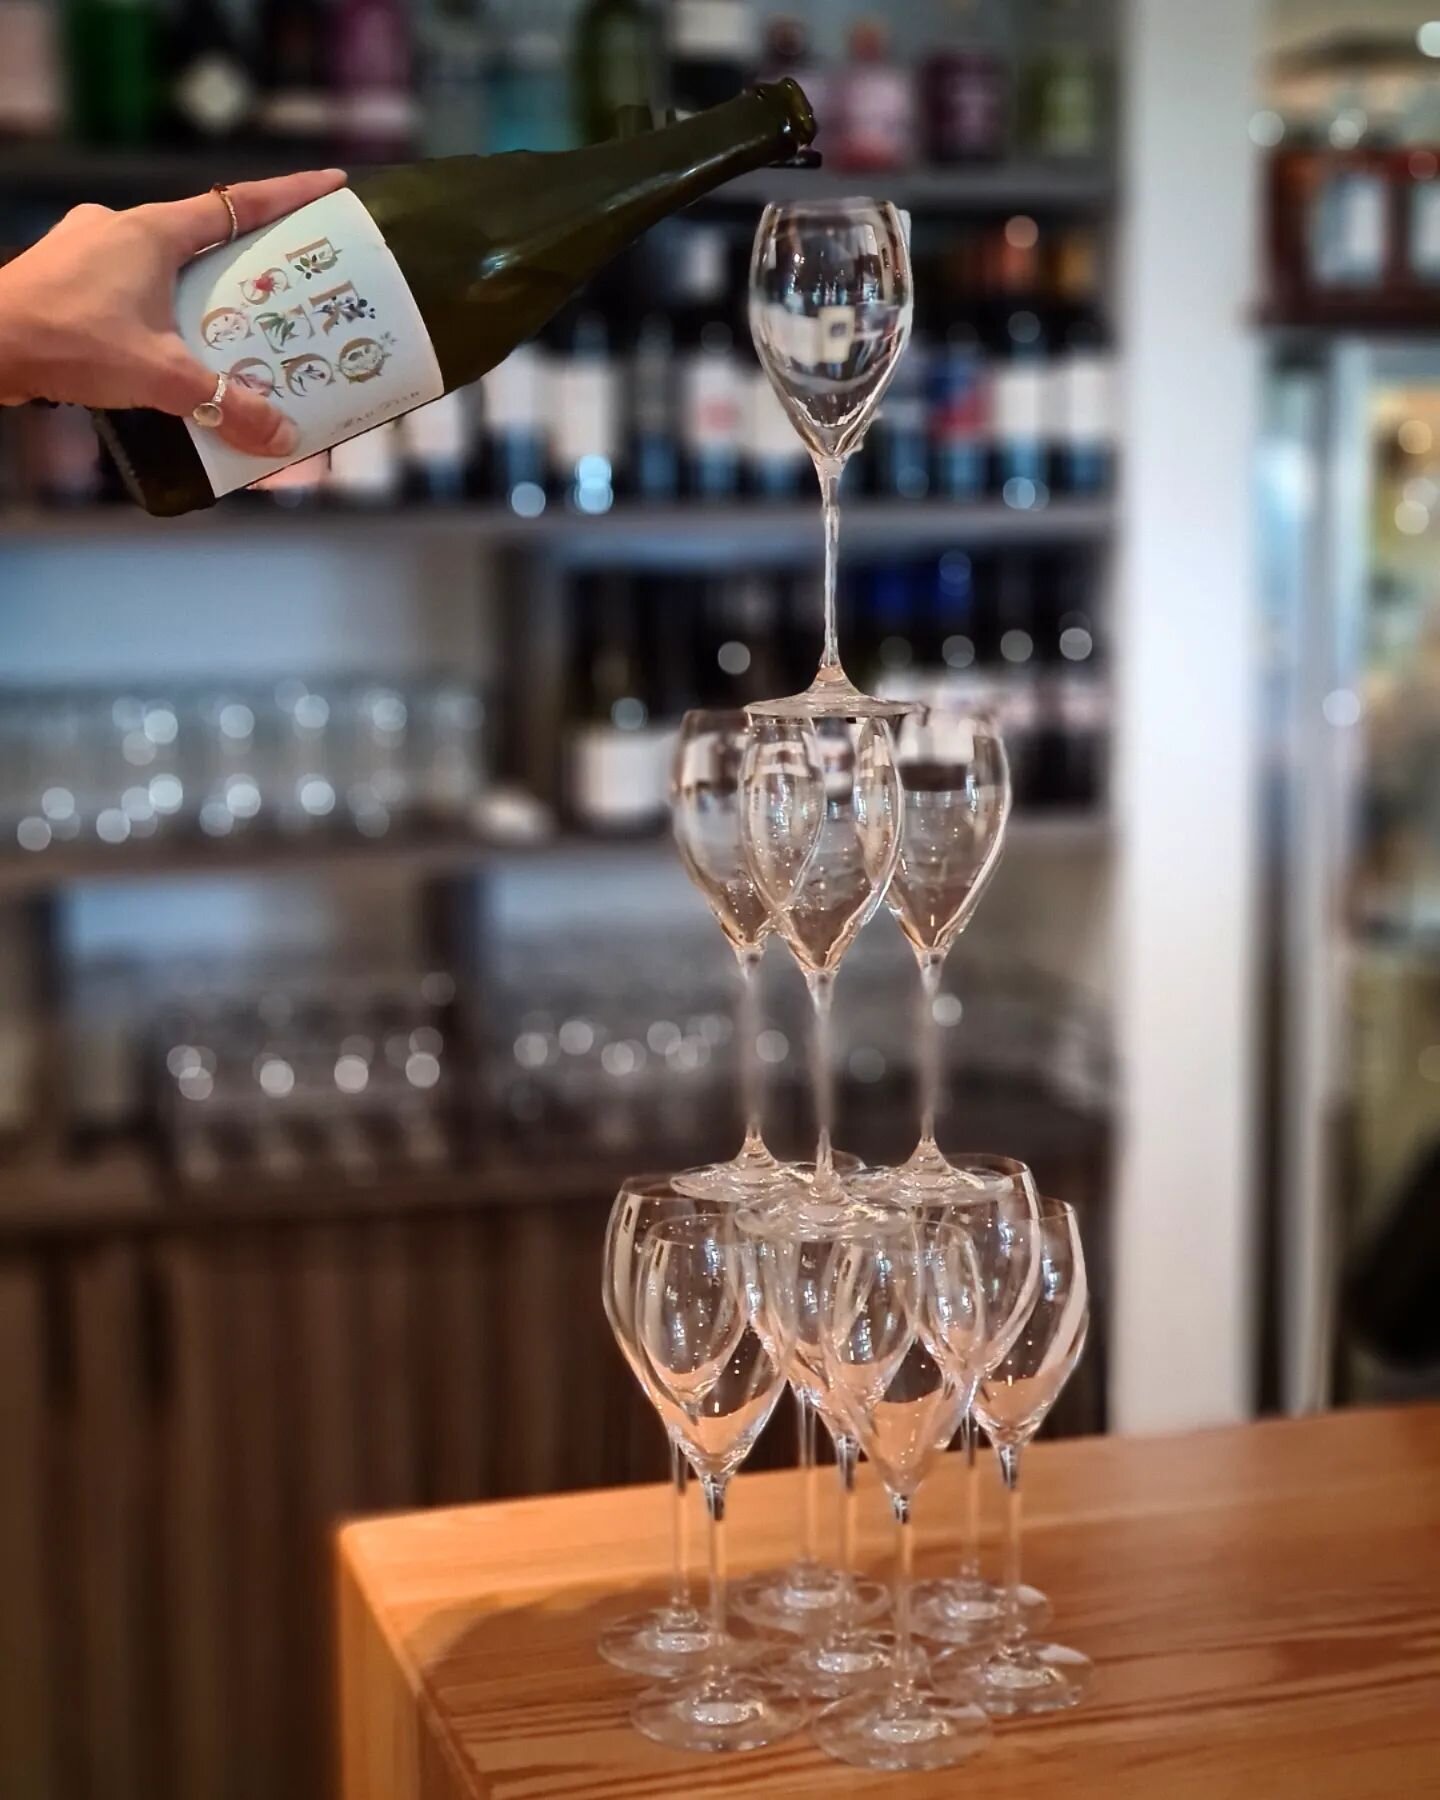 Preparing for Mothers Day in true Tonic style. 
.
.
.
.
#mothersday #Broadwater #downsouth #bubbles #ladiesthatlunch #hightea #delicious #weekend #funtimes